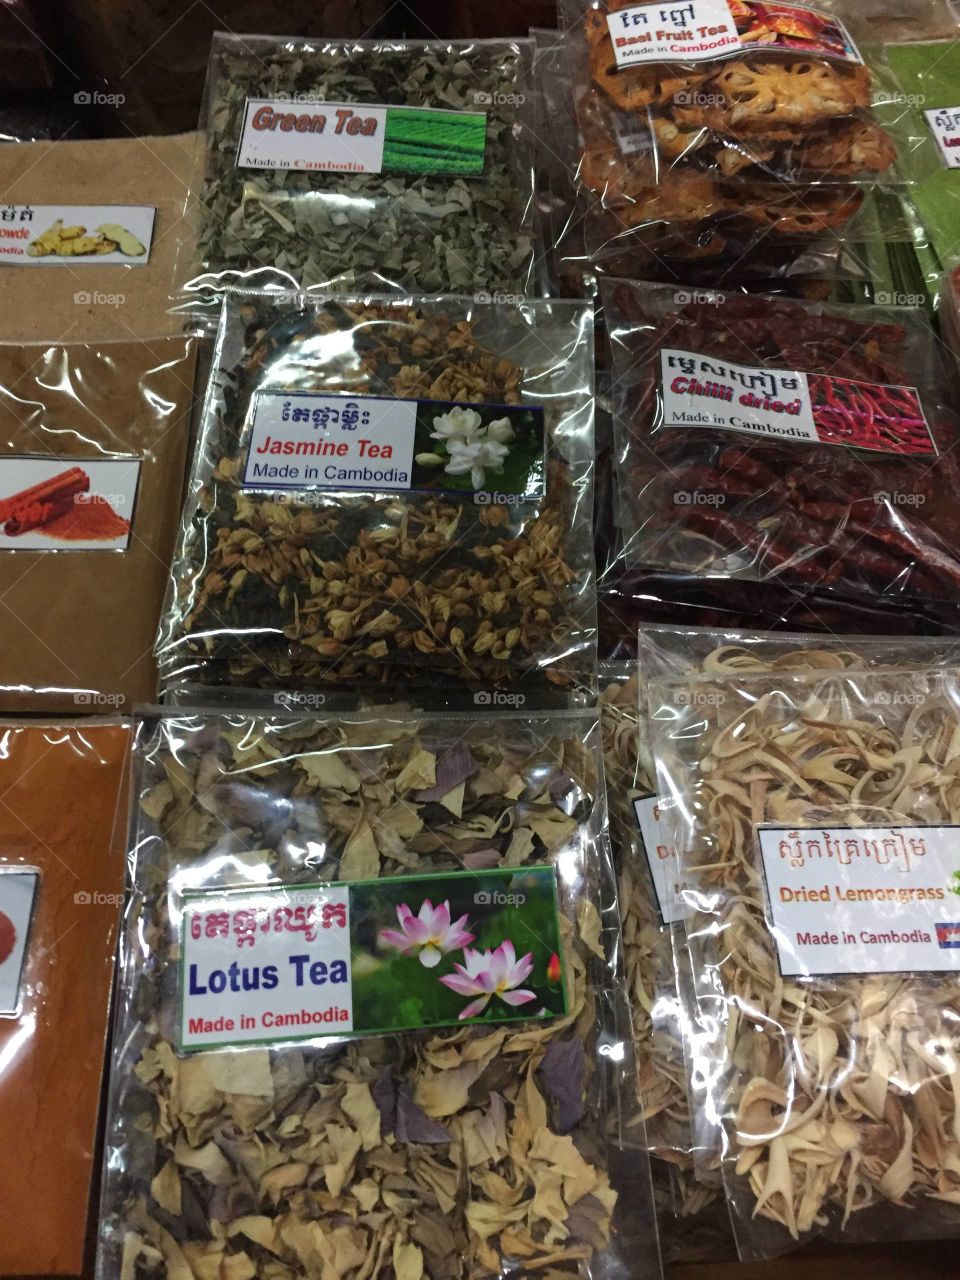 Cambodian Market Tea and Spices at a Local Market in Cambodia. April 2019.